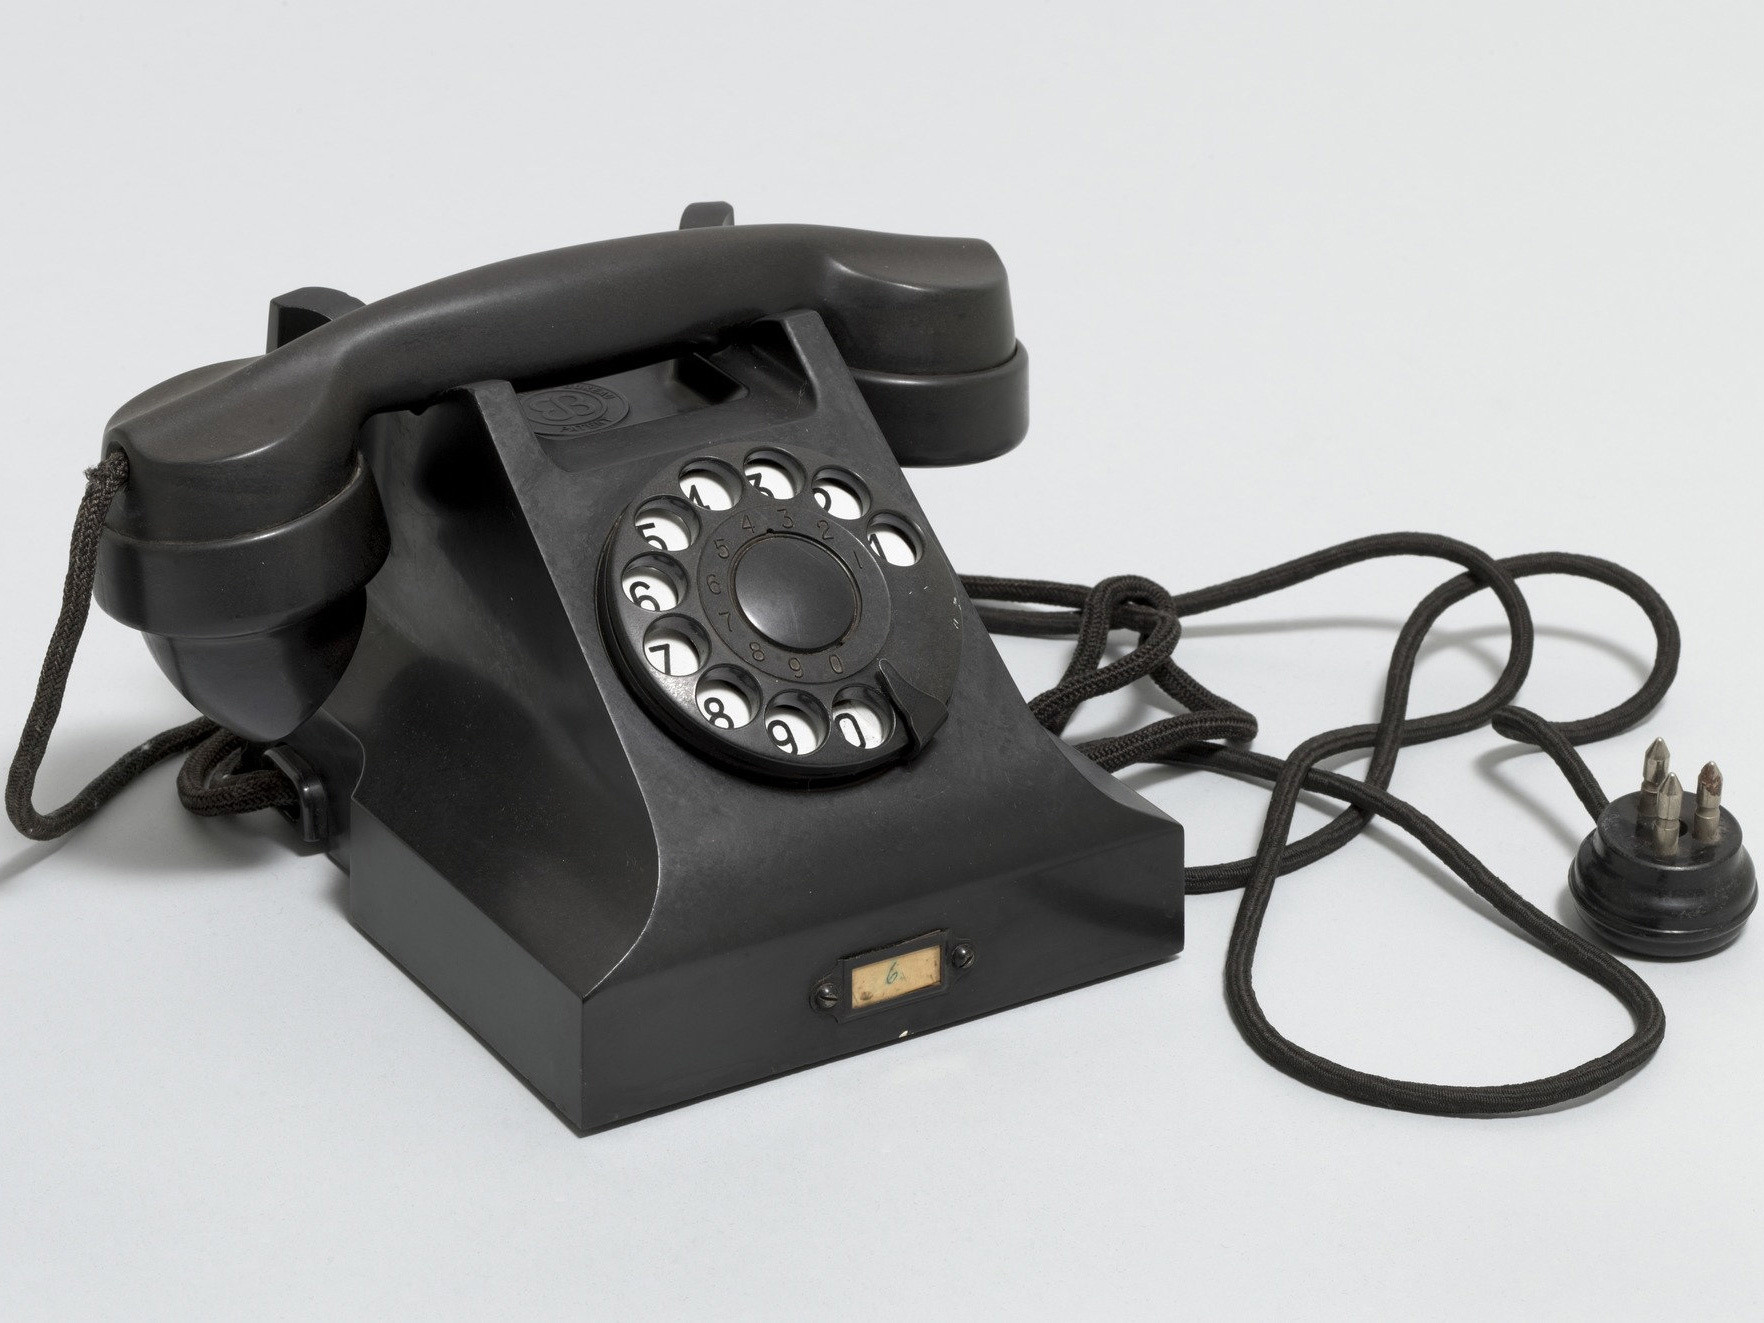 Jean Heiberg. Ericsson Telephone (model DBH 1001). 1932. Bakelite, sheet brass, and painted nickel-plate. Manufacturer: Elektrisk Bureau. Gift of The National Museum – The Museum of Decorative Arts and Design, Oslo